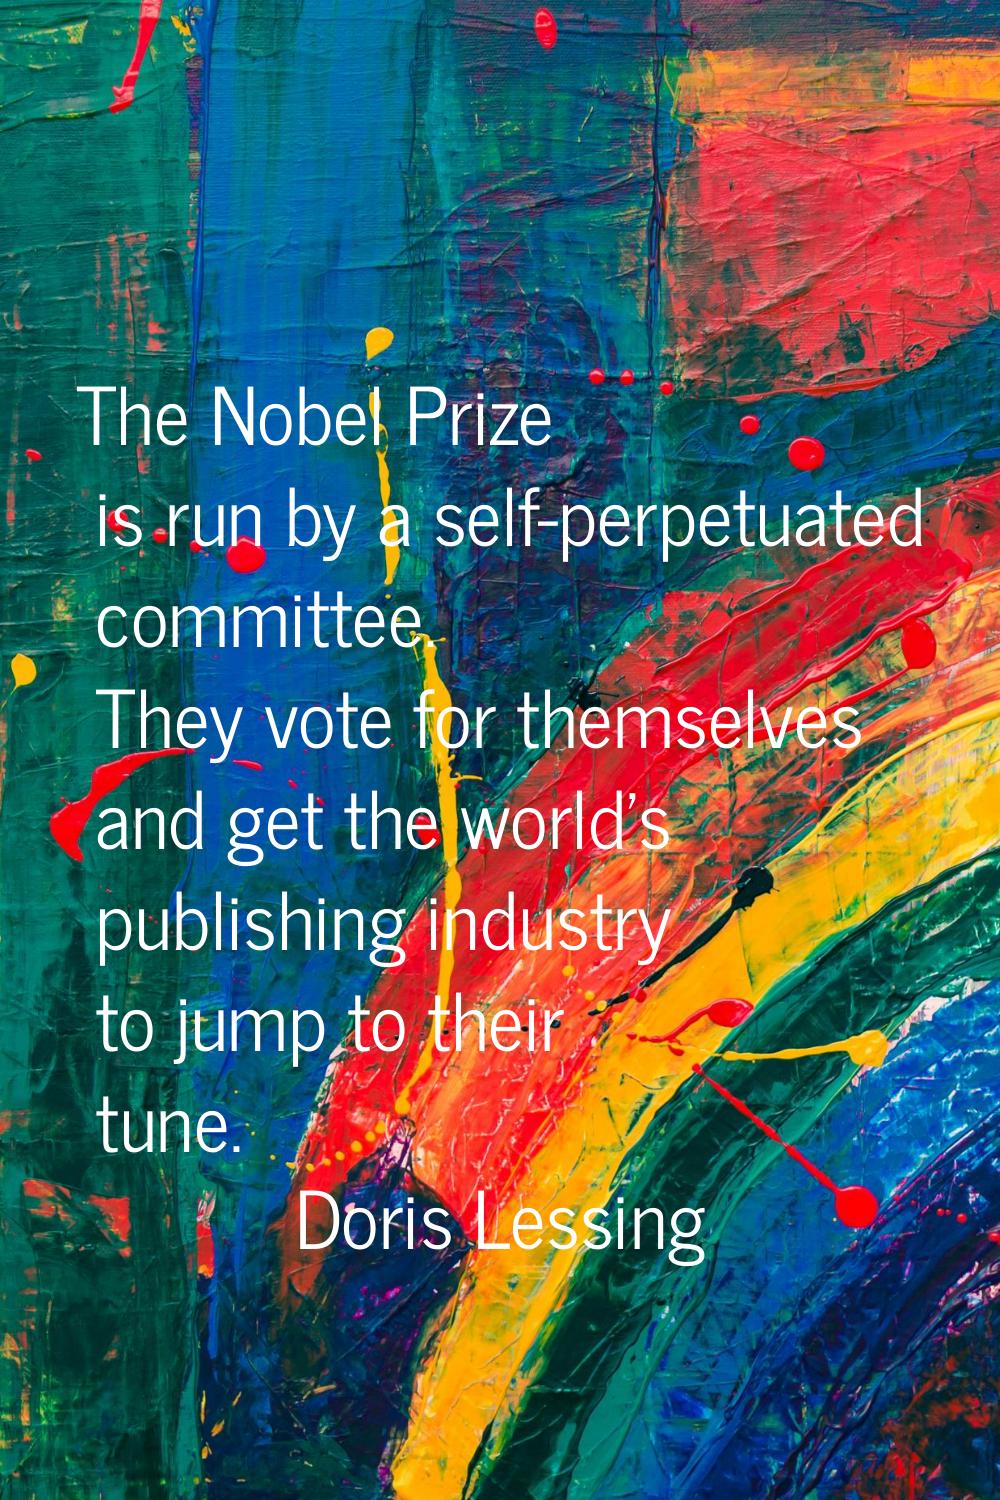 The Nobel Prize is run by a self-perpetuated committee. They vote for themselves and get the world'